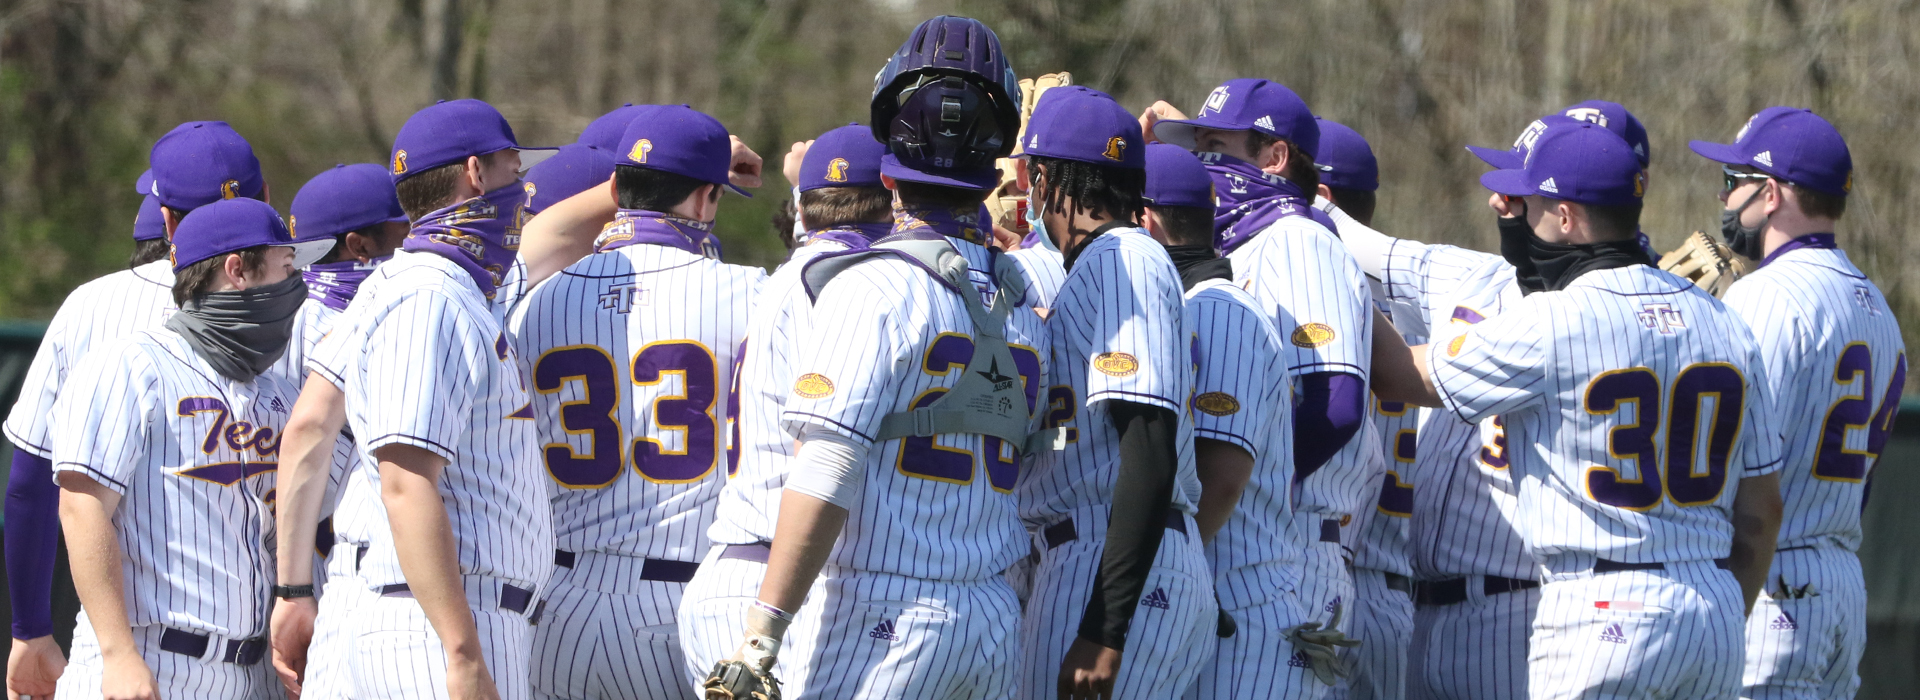 Tech baseball hits the road for fifth meeting with Belmont in 2021 on Tuesday